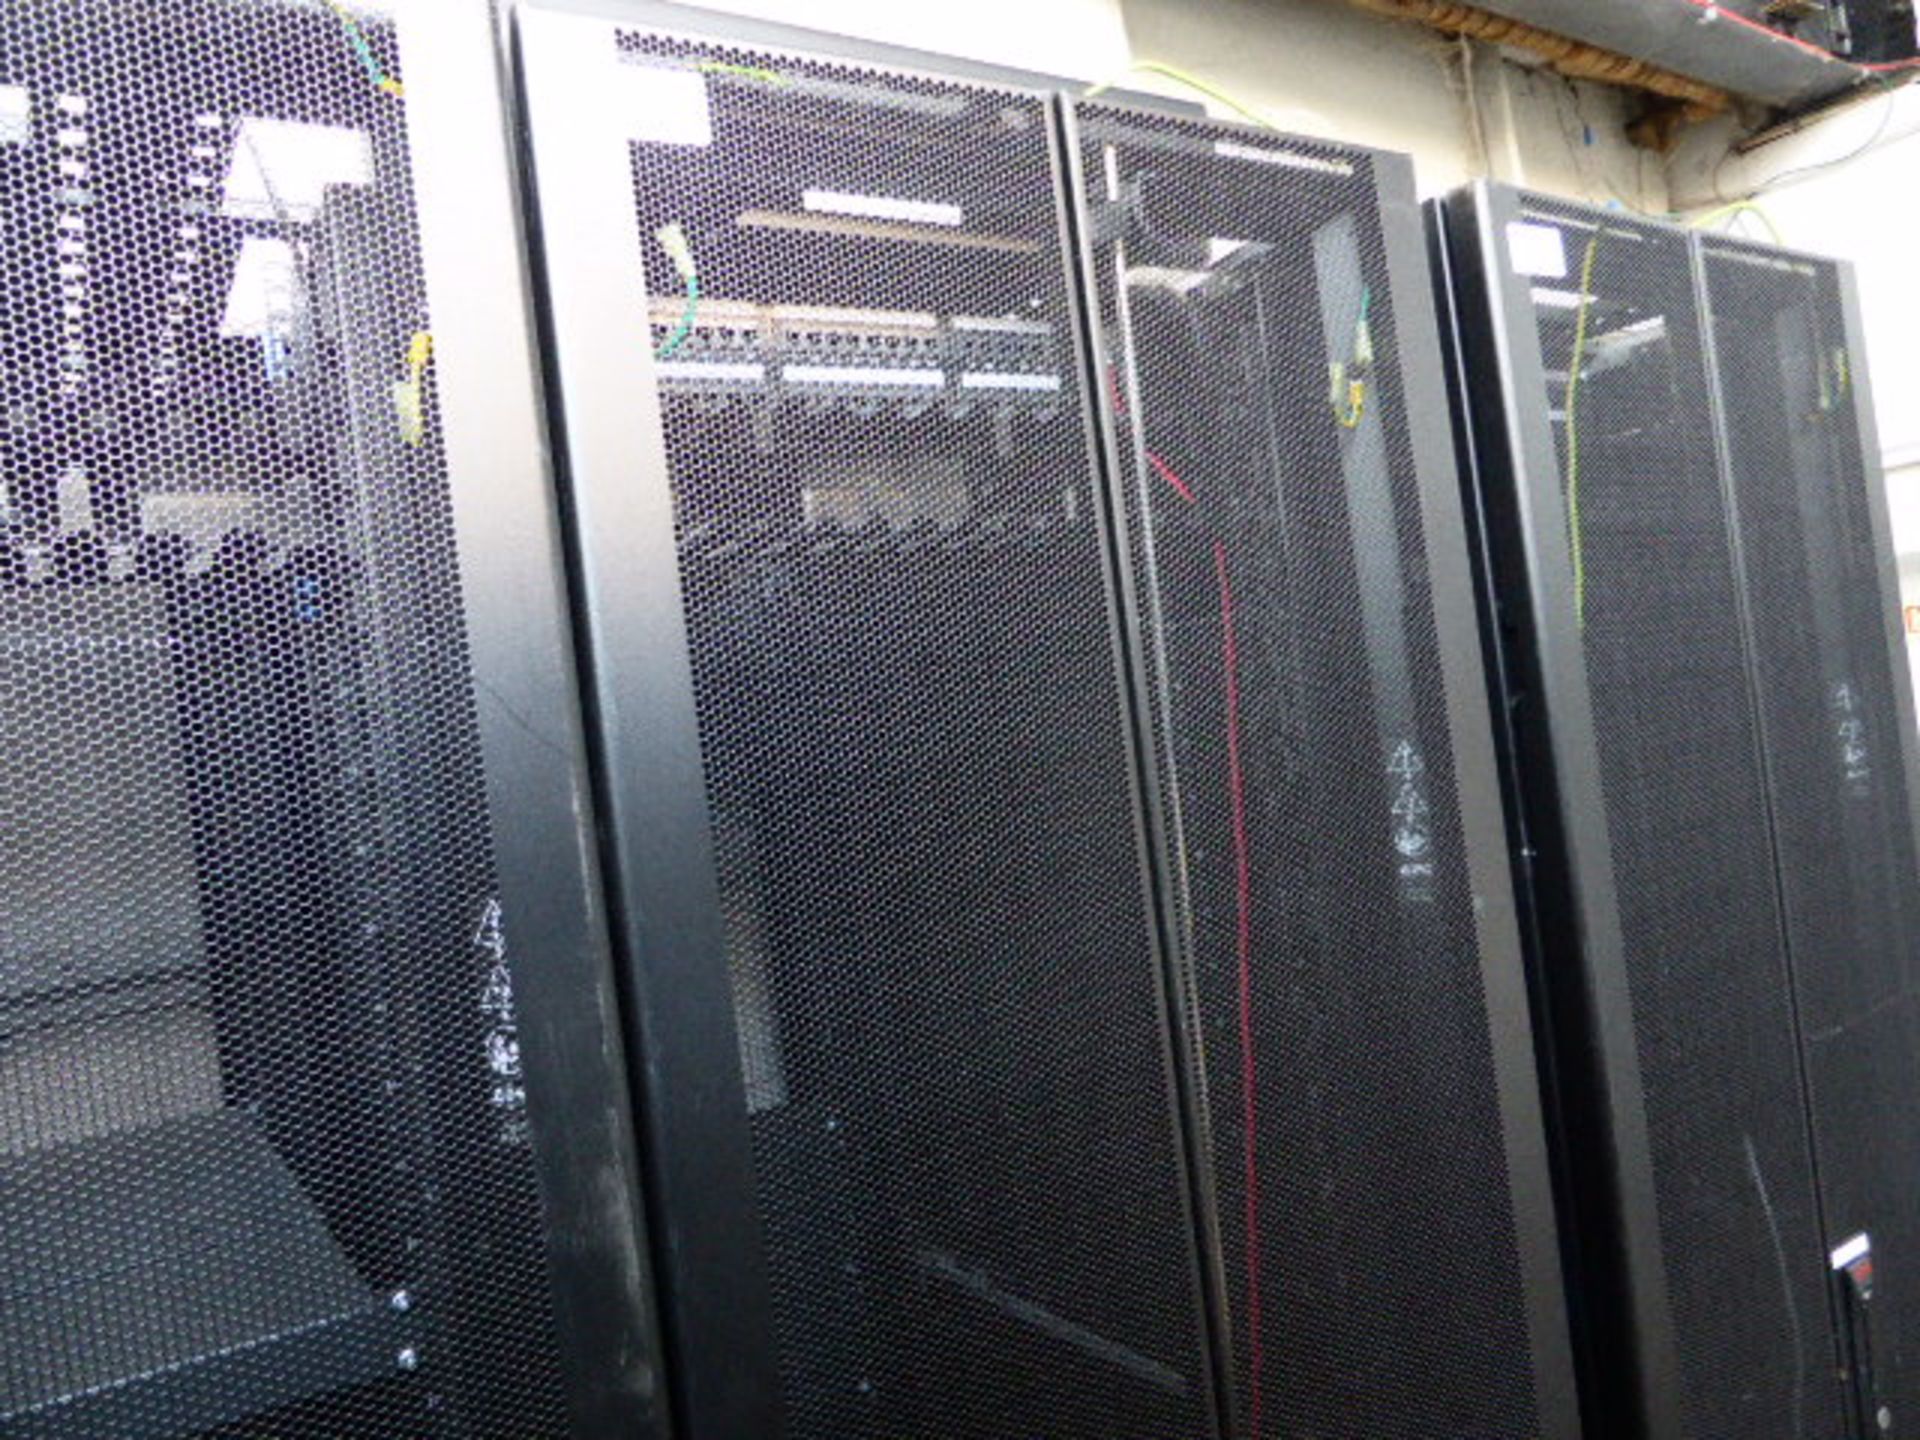 APC server cabinet on castors 60cm wide with 2 APC switch rack PDU units each with 24 outputs on